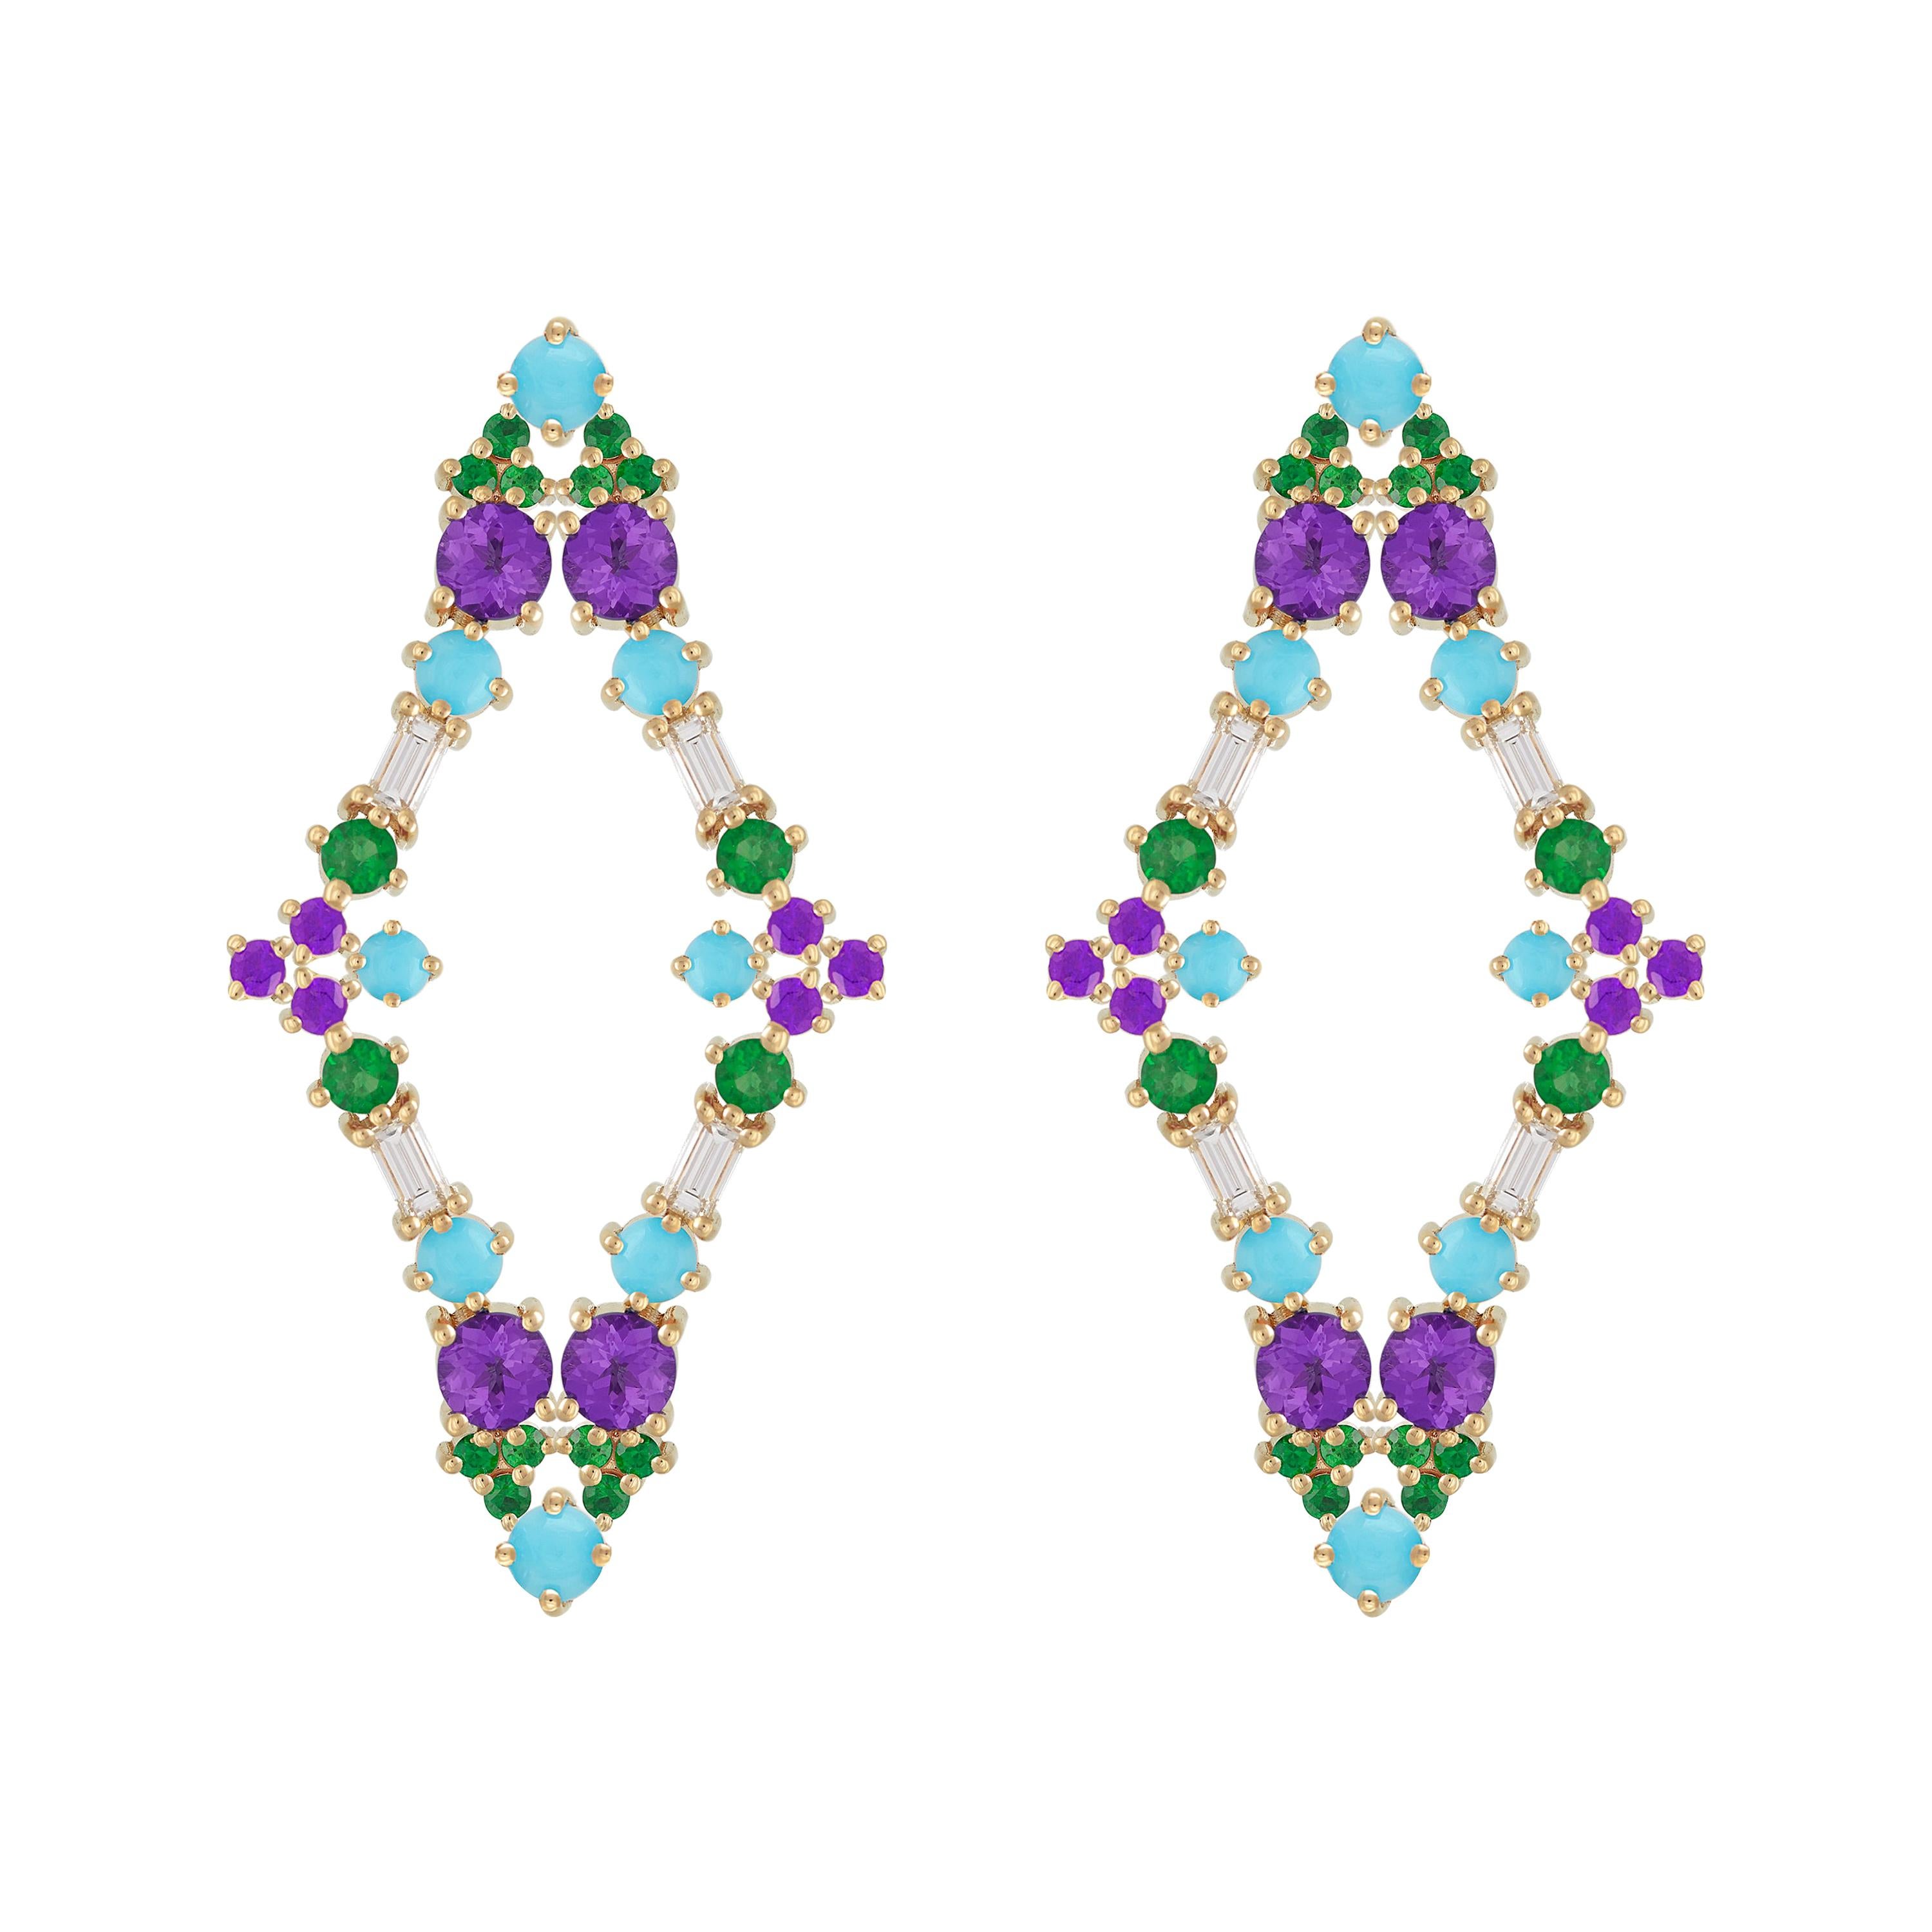 Colorful Earrings in 18kt Gold with Emeralds, Amethysts, Diamonds and Turquoise